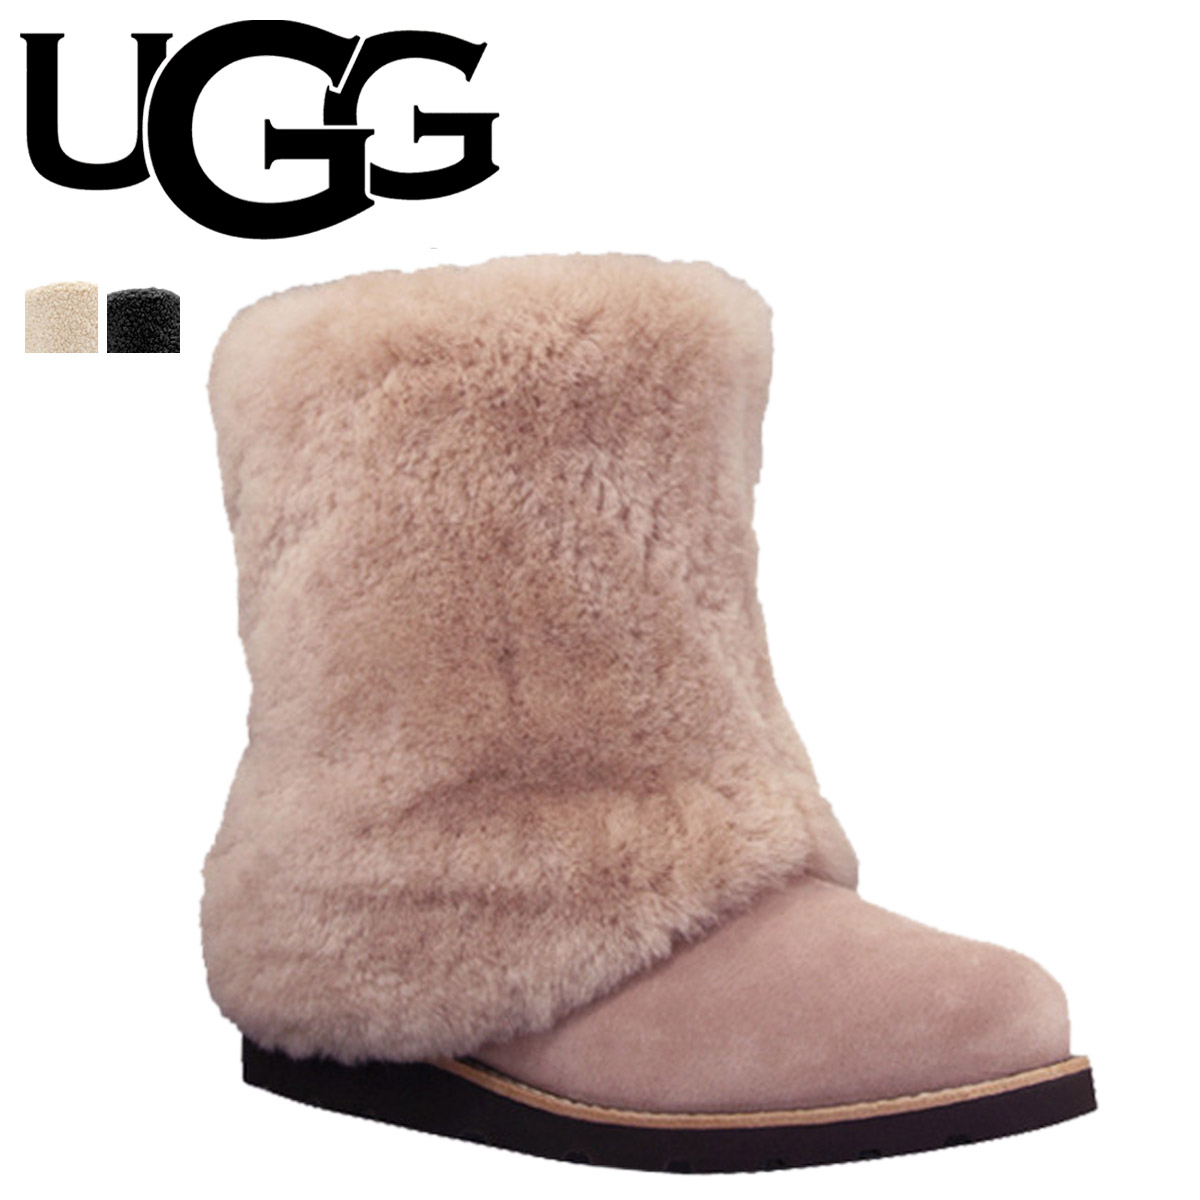 where to buy uggs near me